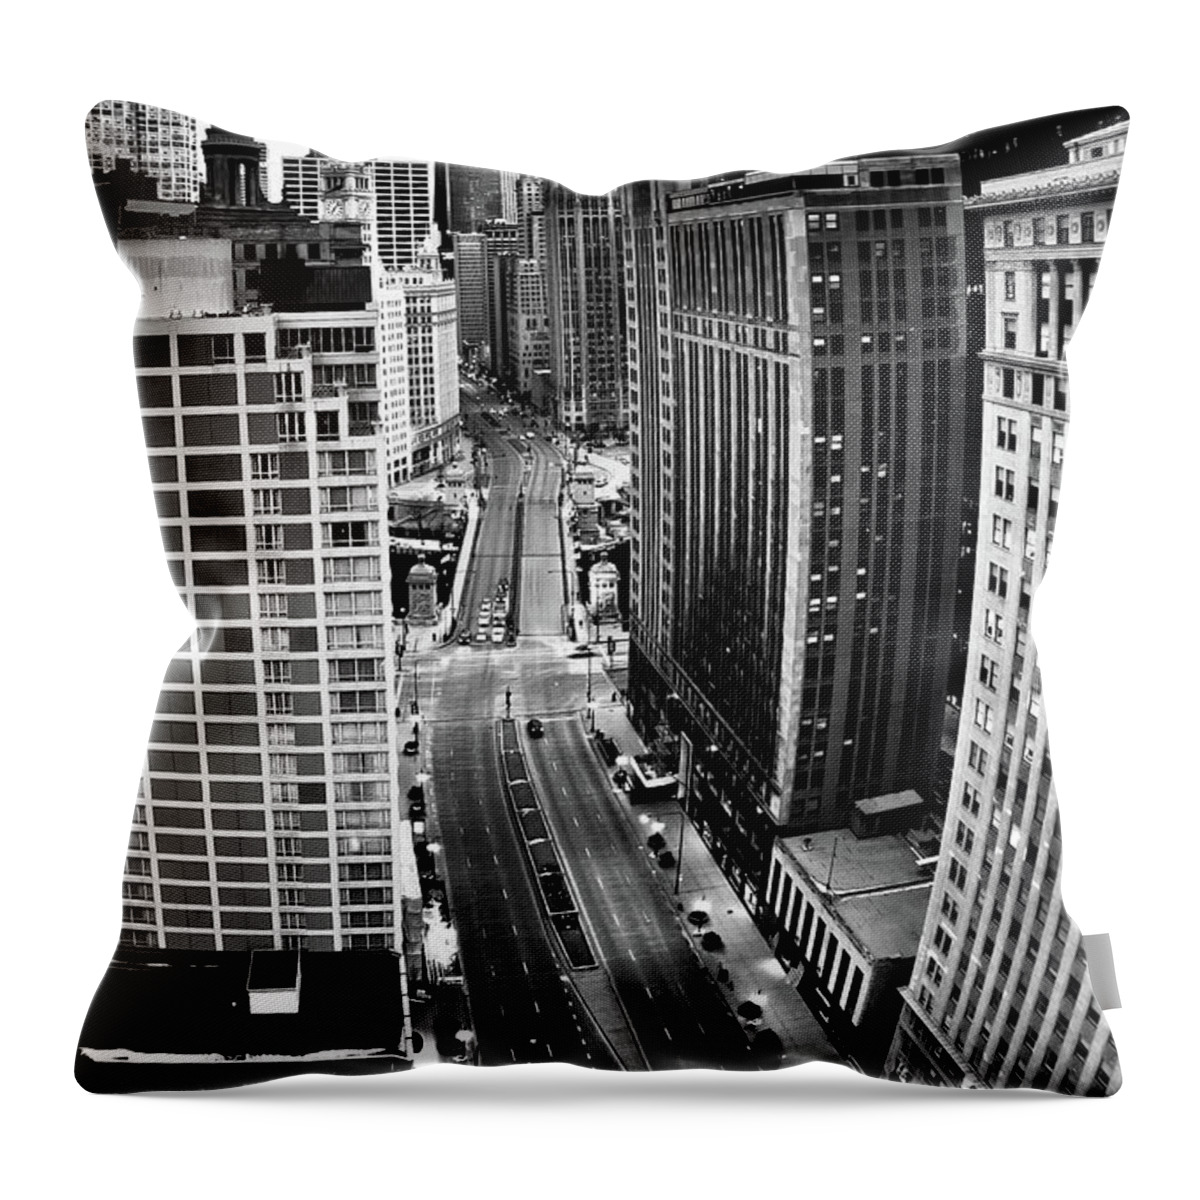 Hotel Throw Pillow featuring the photograph Hotel View by George Imrie Photography